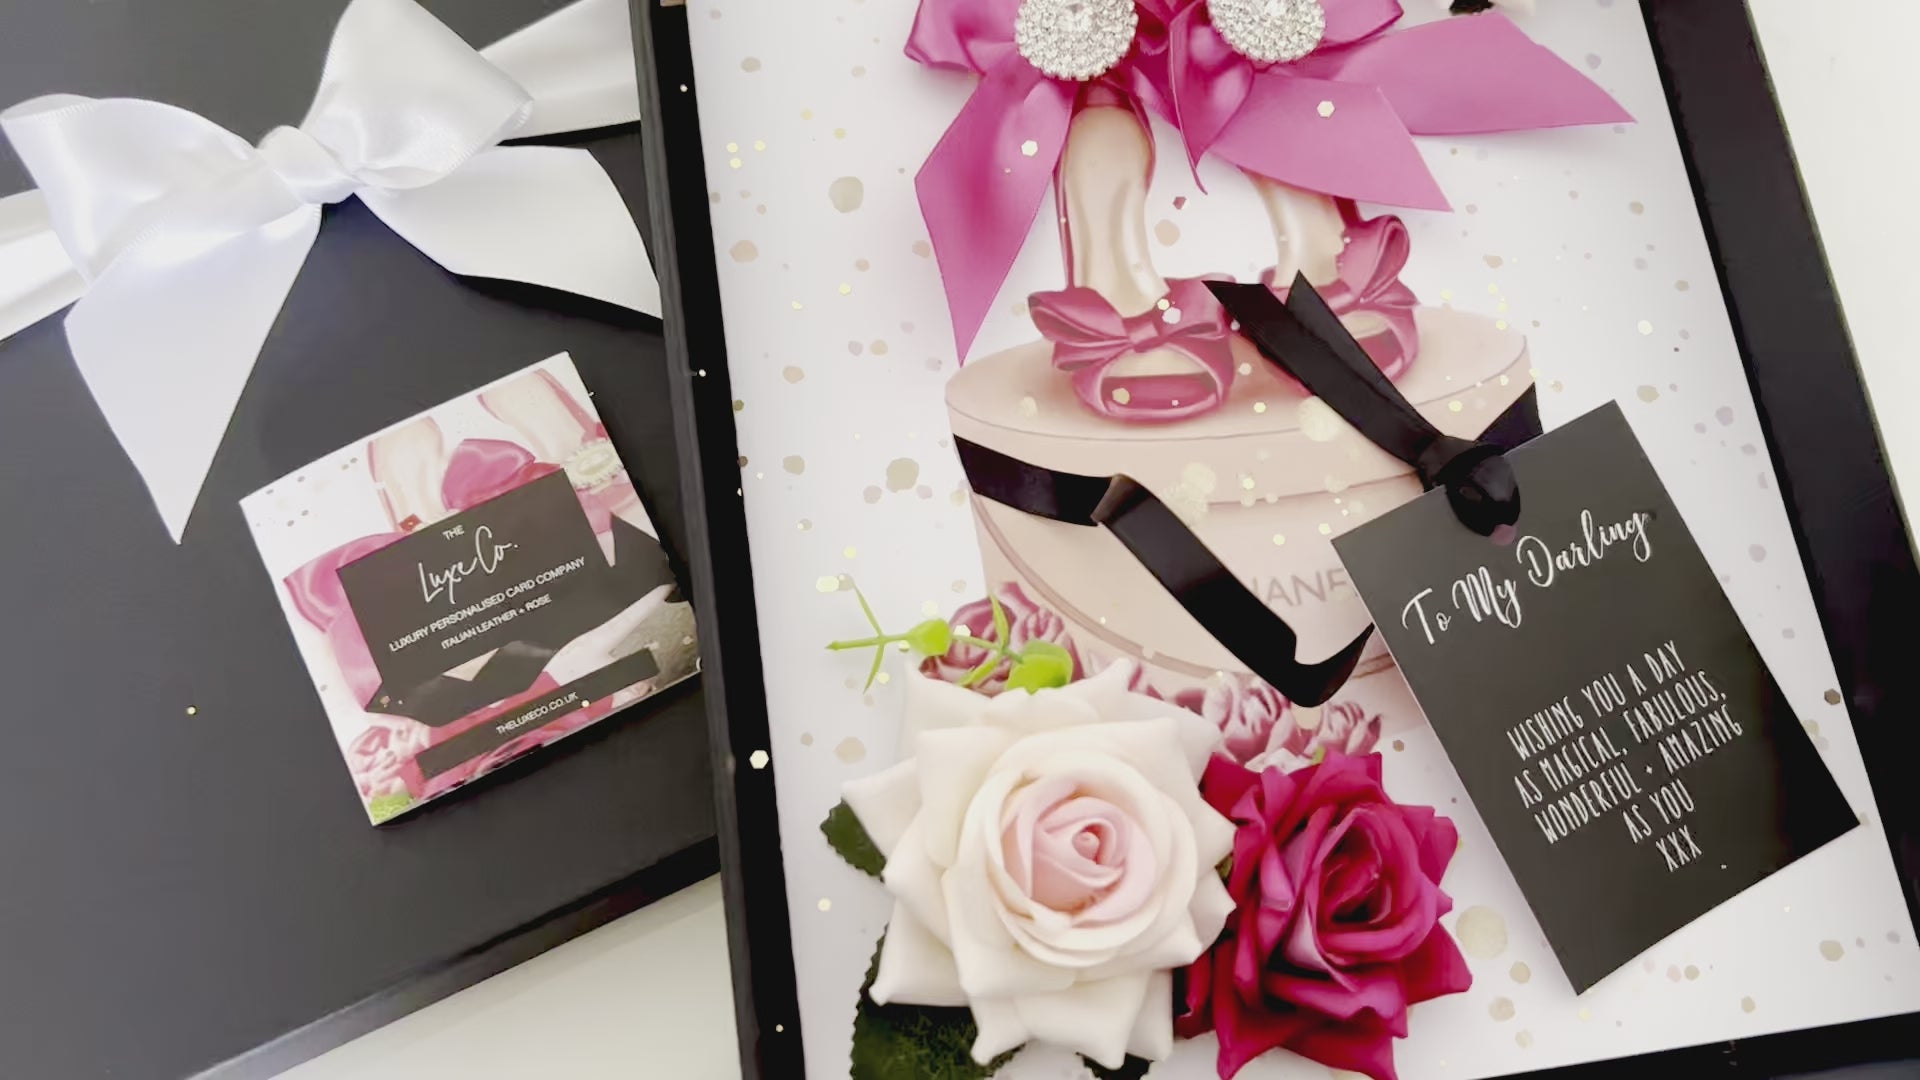 Video showcase showing the luxury handmade Chanel High Heels Shoe Scented Card Design